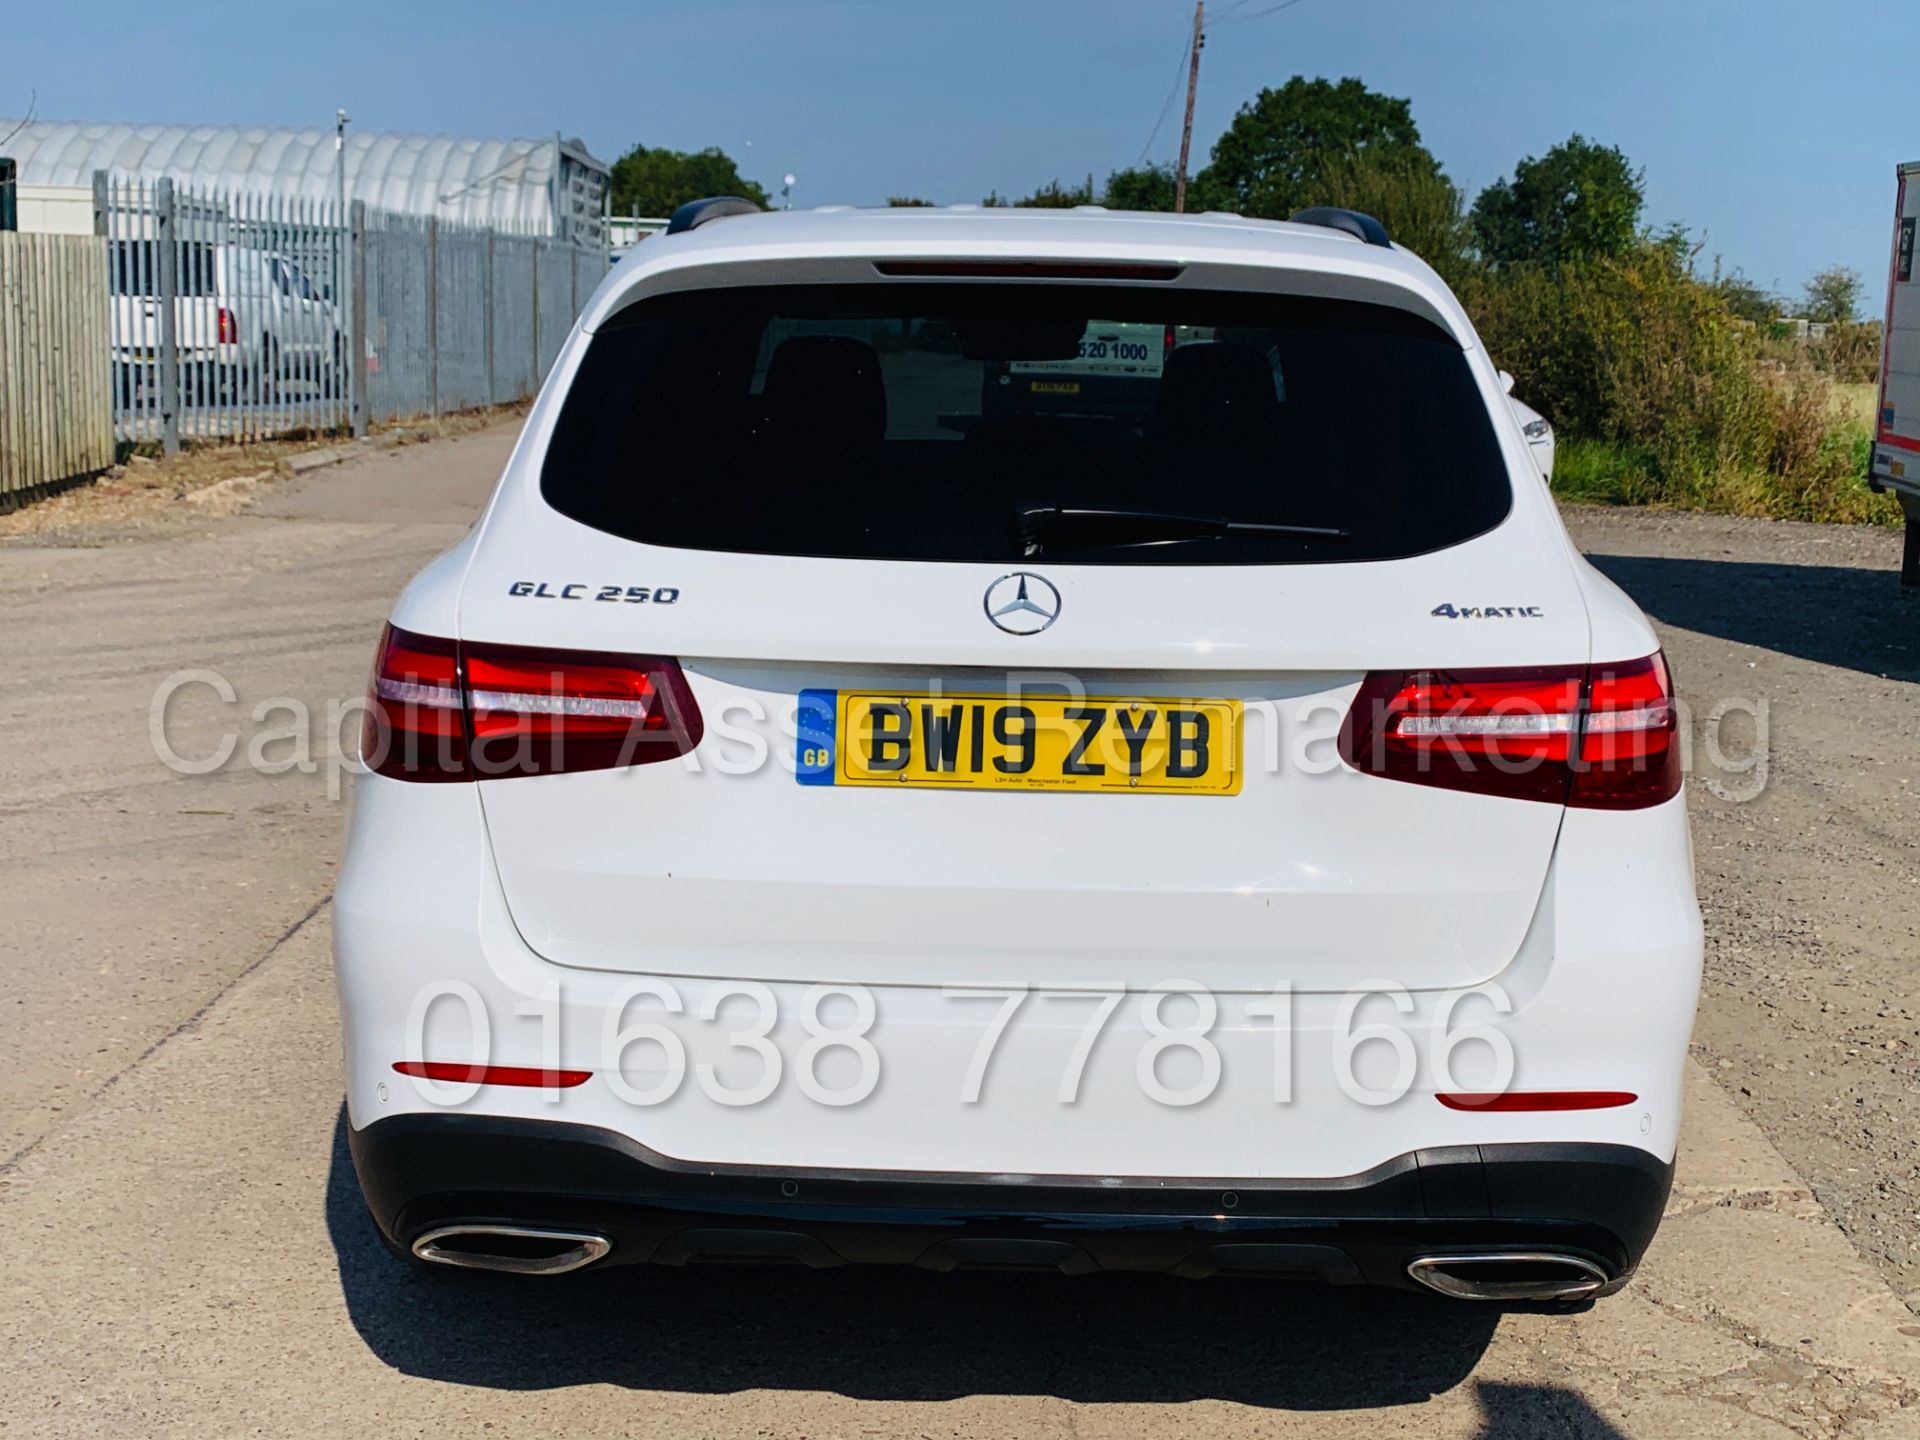 (On Sale) MERCEDES-BENZ GLC 250 *AMG - NIGHT EDITION* SUV (2019) '9G TRONIC - 4-MATIC' *HUGE SPEC* - Image 11 of 53